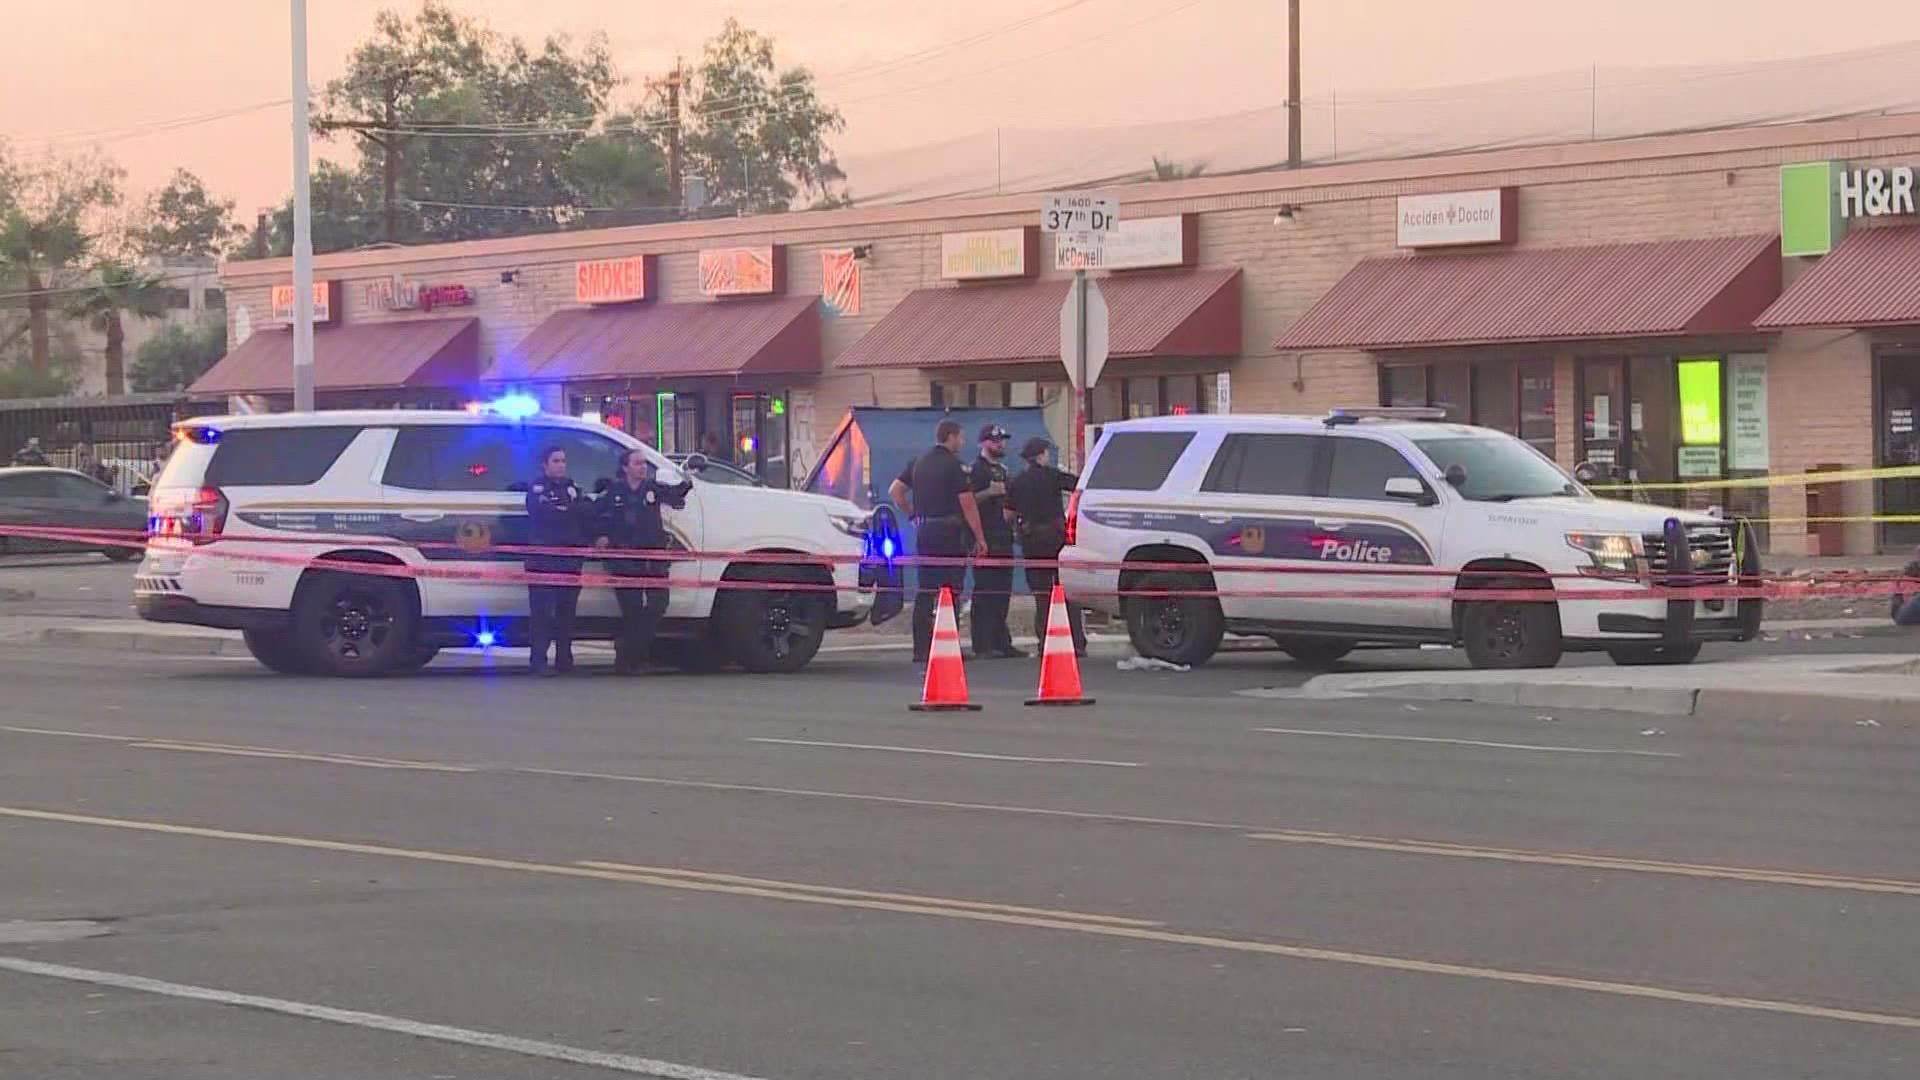 Phoenix police say no officers were injured in the shooting Wednesday evening near 37th Avenue and McDowell Road.